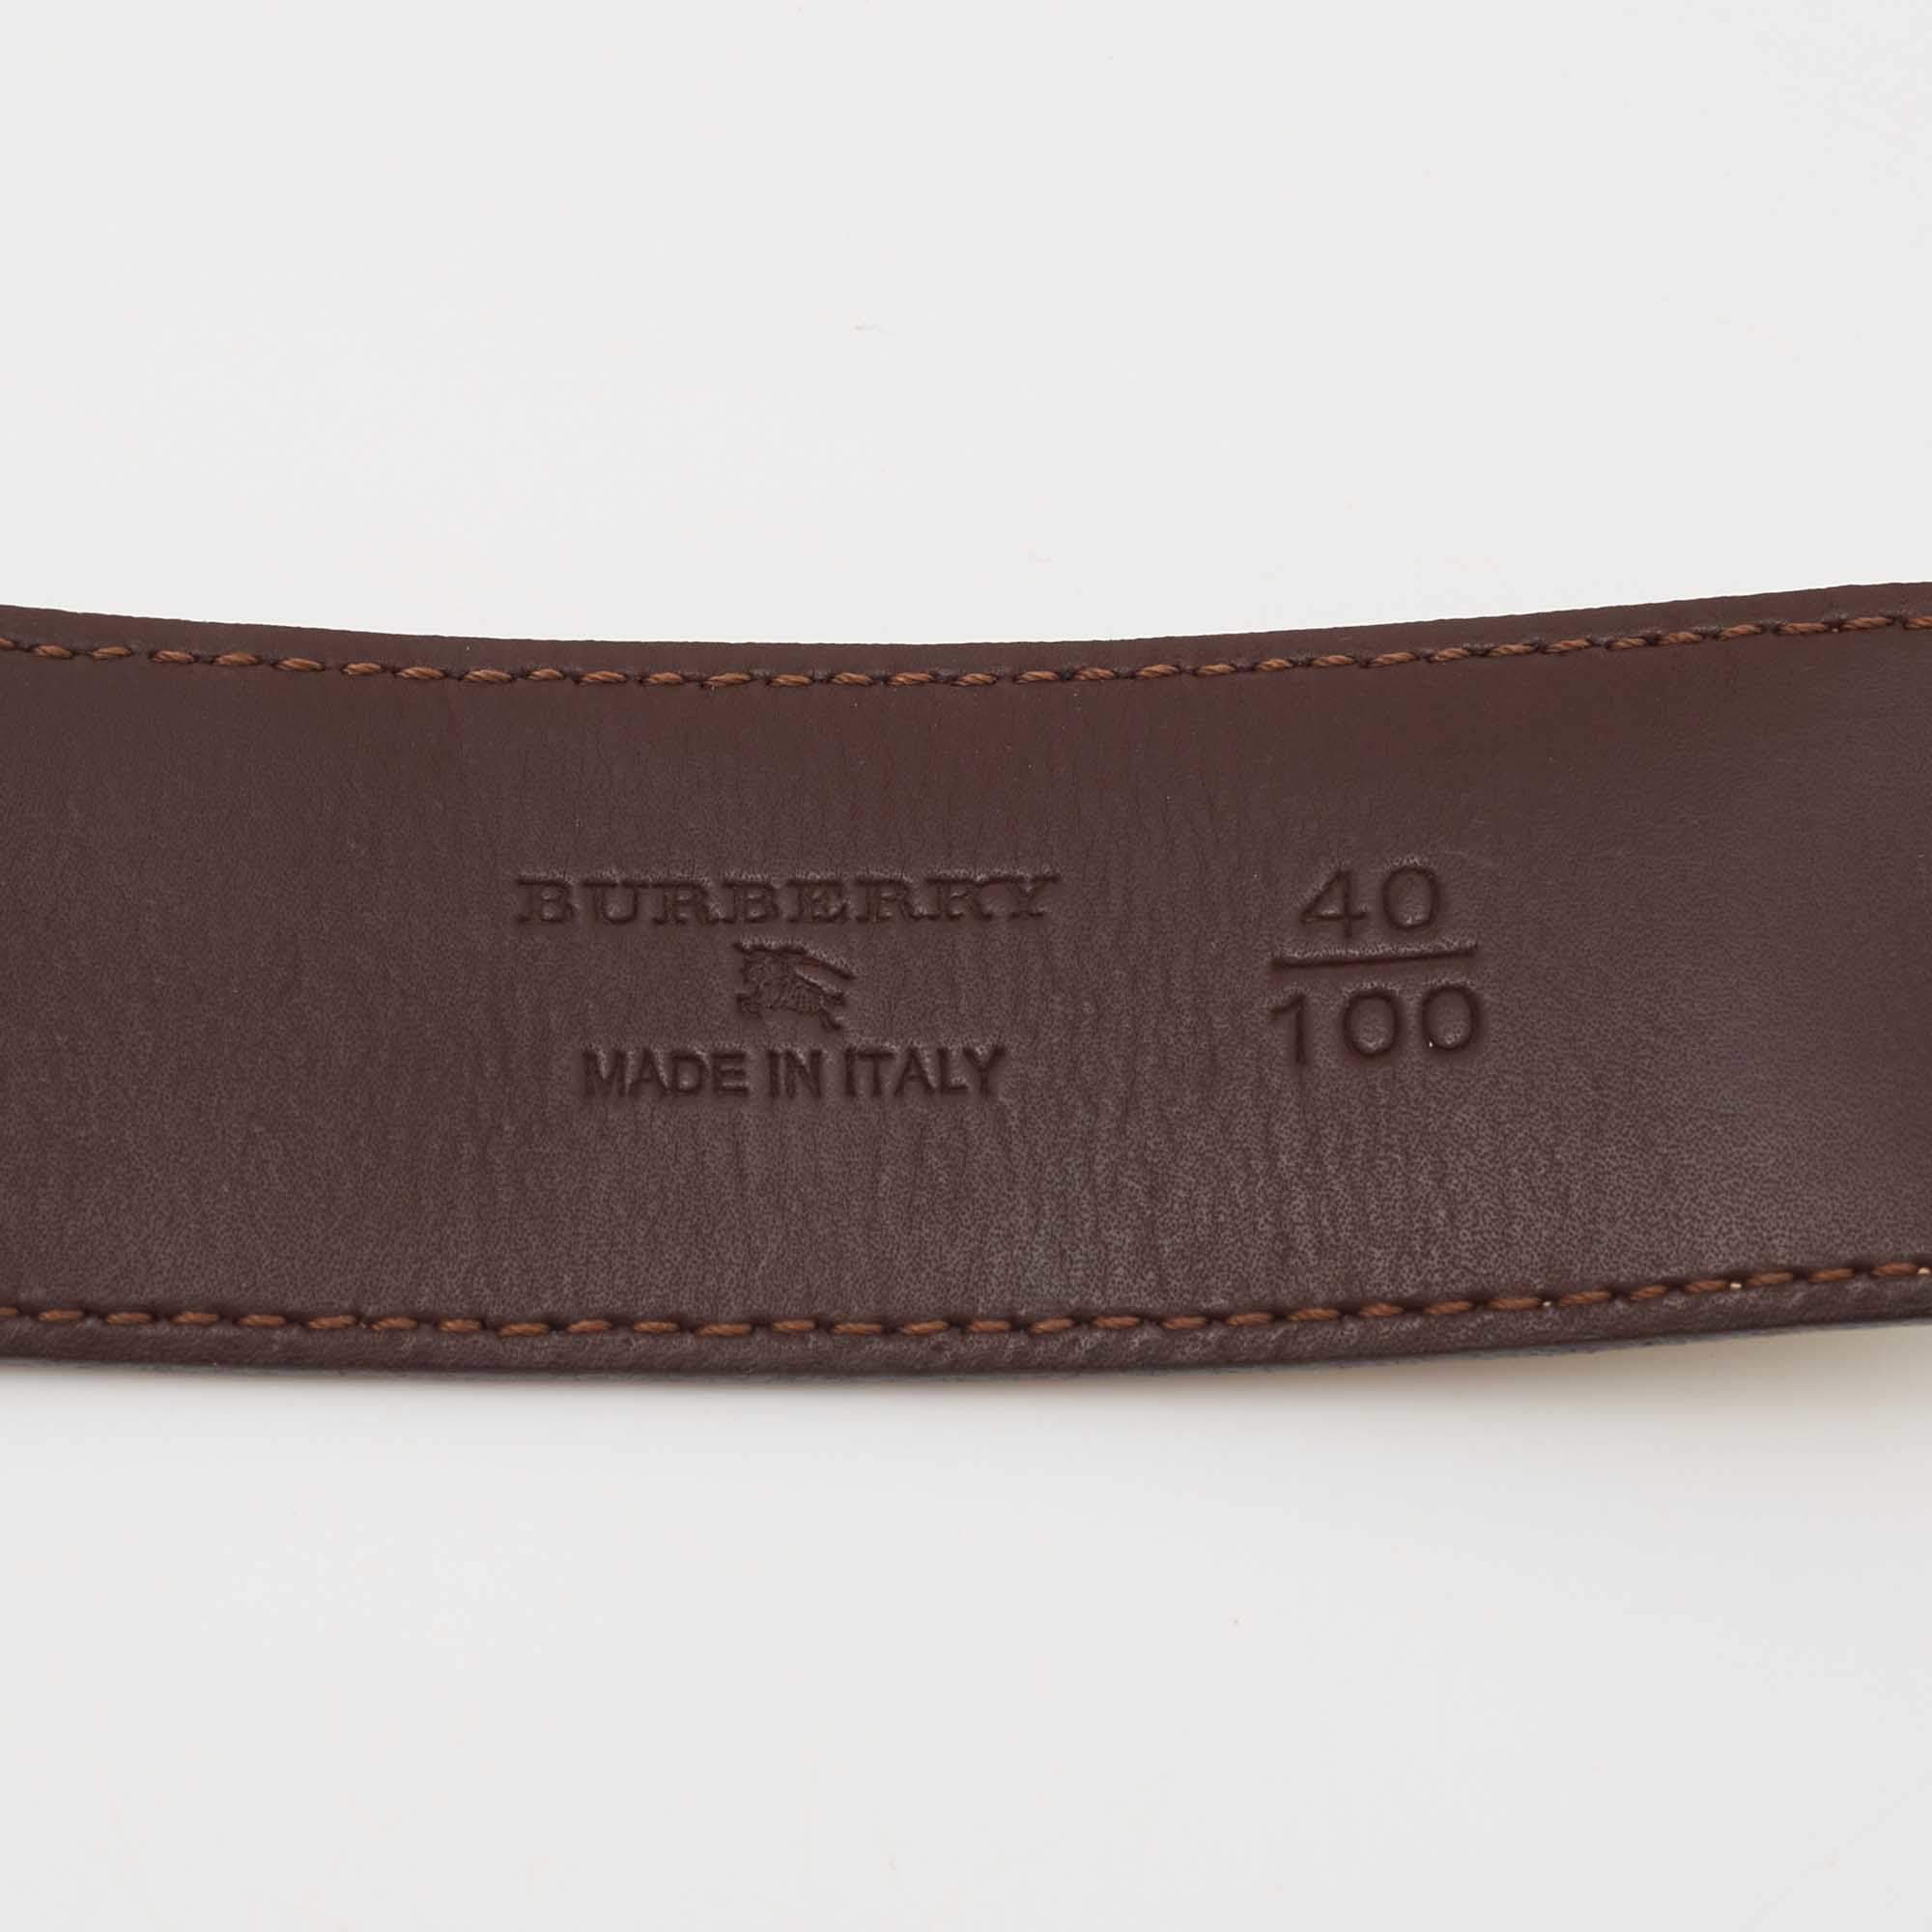 Burberry Beige Classic Check Coated Canvas Barnsfield Plaque Belt 75CM  Burberry